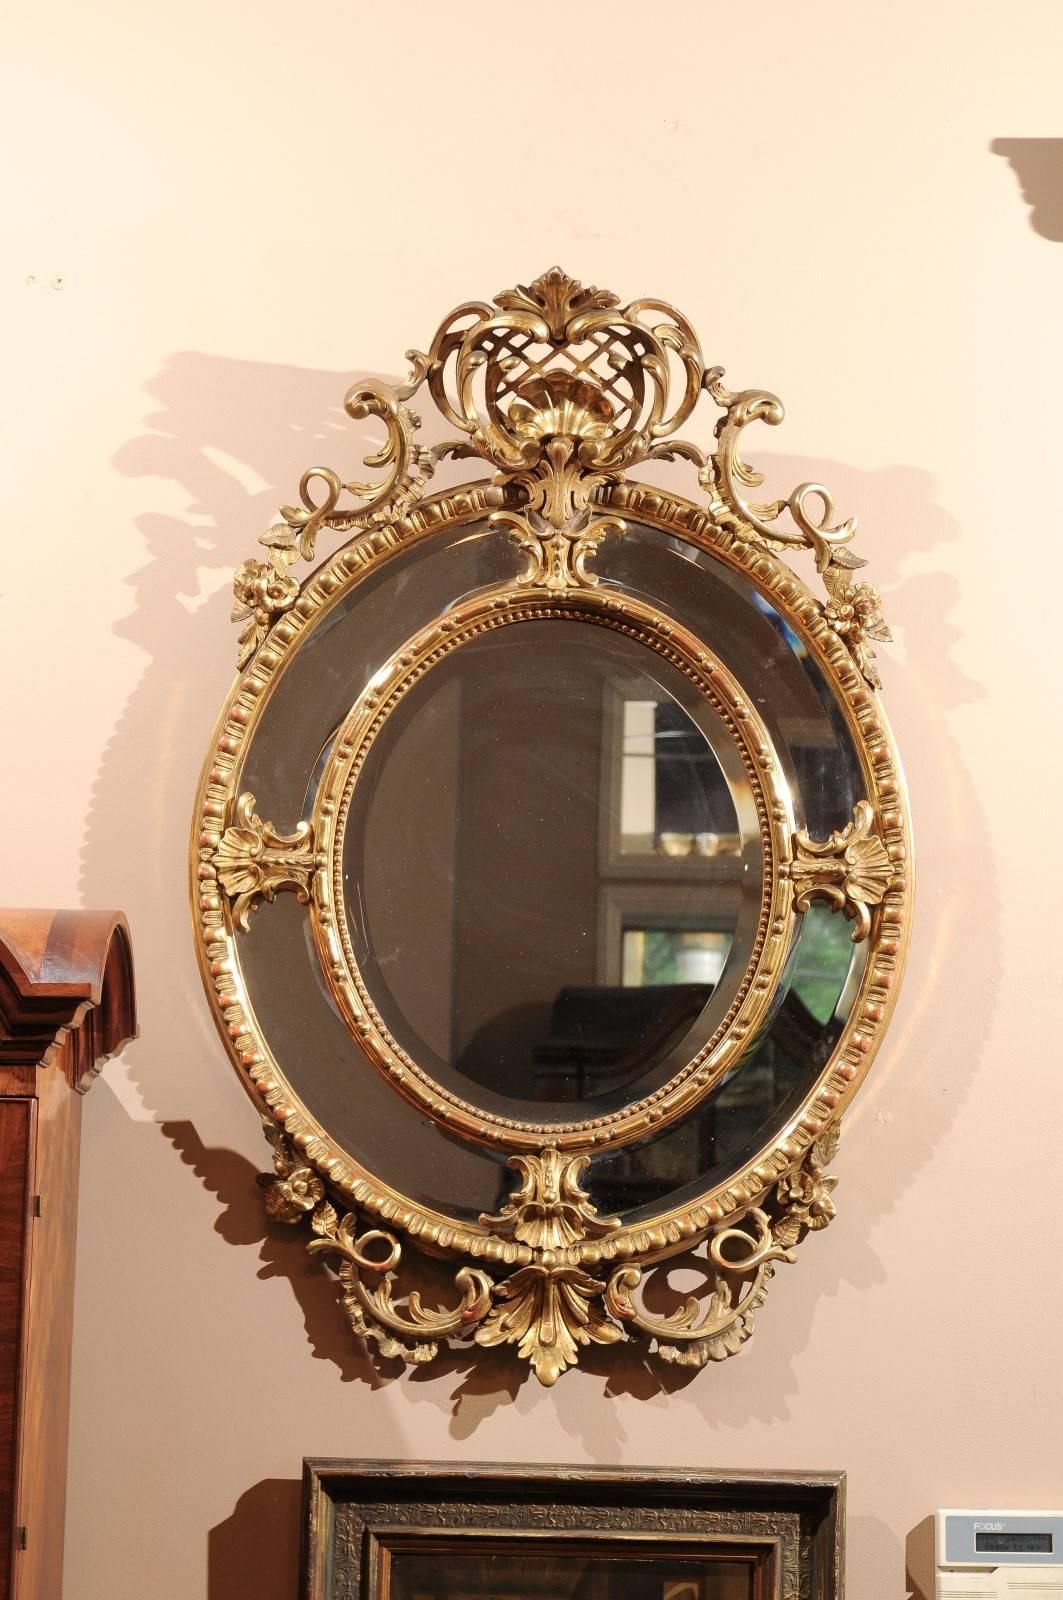 An exquisite circa 1840s gold leaf, ornately carved oval mirror. Hand bevelled and original mercury glass. The crown tips forward. A gorgeous addition to any room.